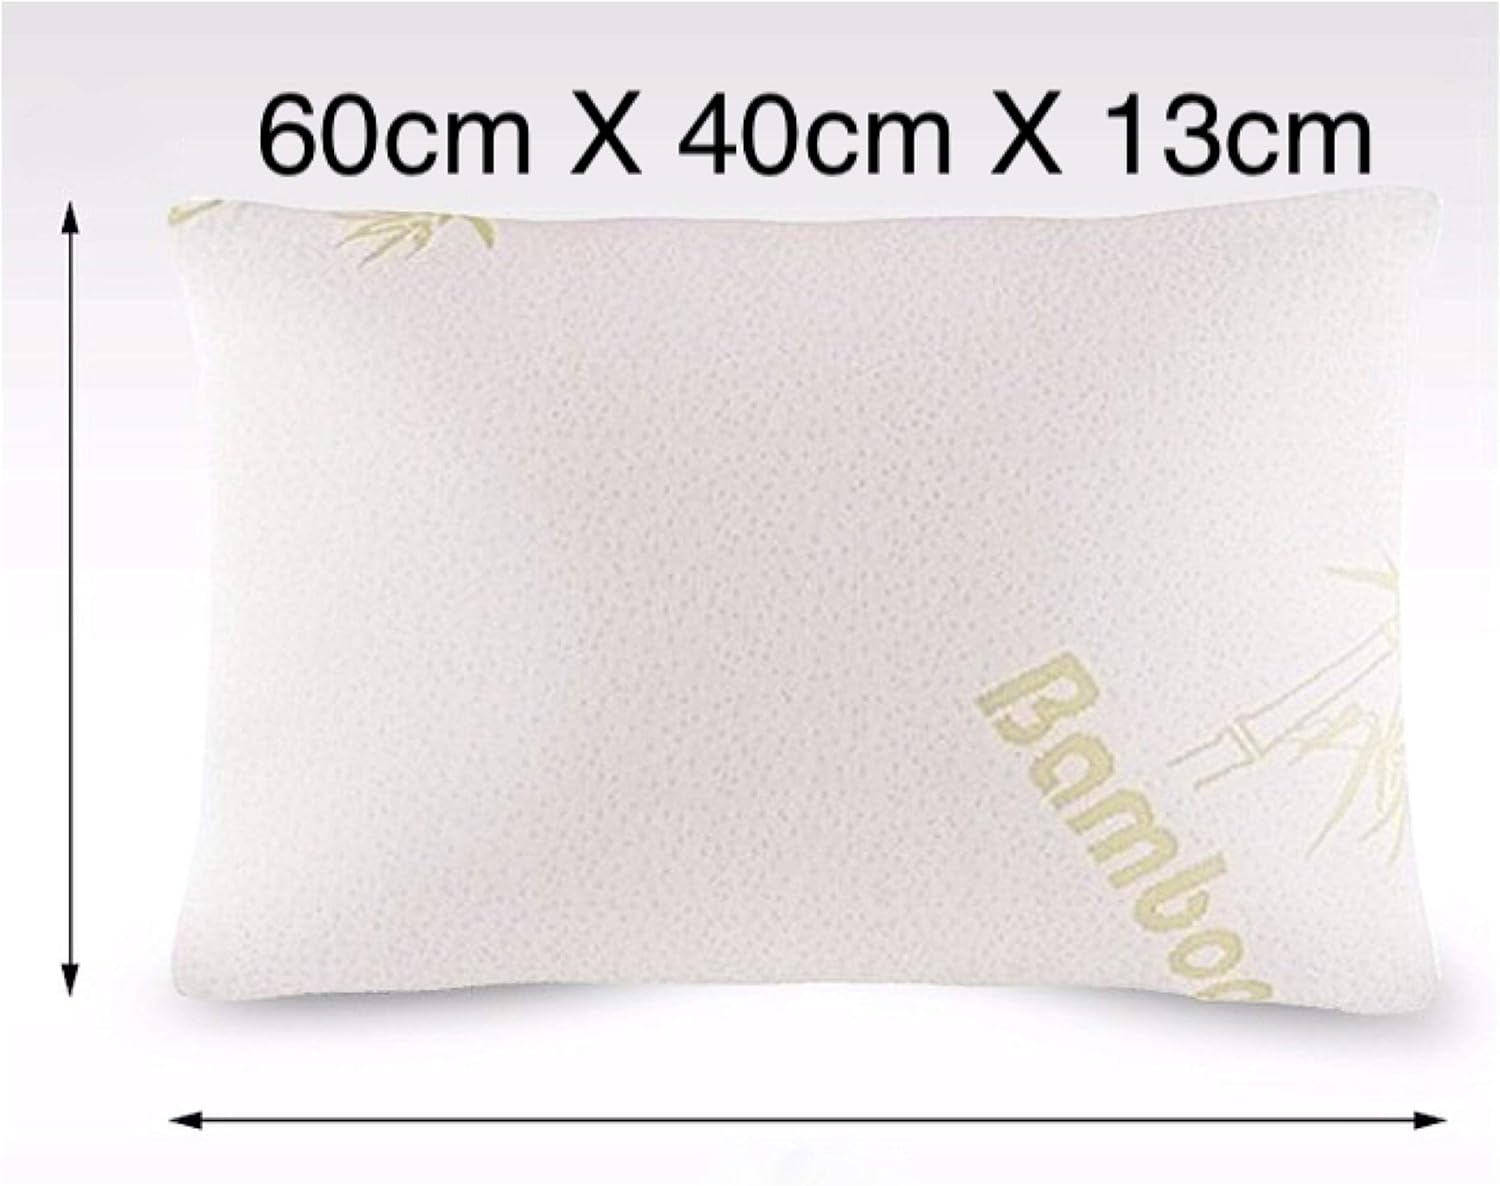 ADEPTNA Soft Bamboo Memory Foam Pillow-Comfortable Nights Sleep-Environmentally Friendly Materials-Stay Cool and Breathable-Hypoallergenic and Antibacterial-with Removable Cover (PACK OF 2)